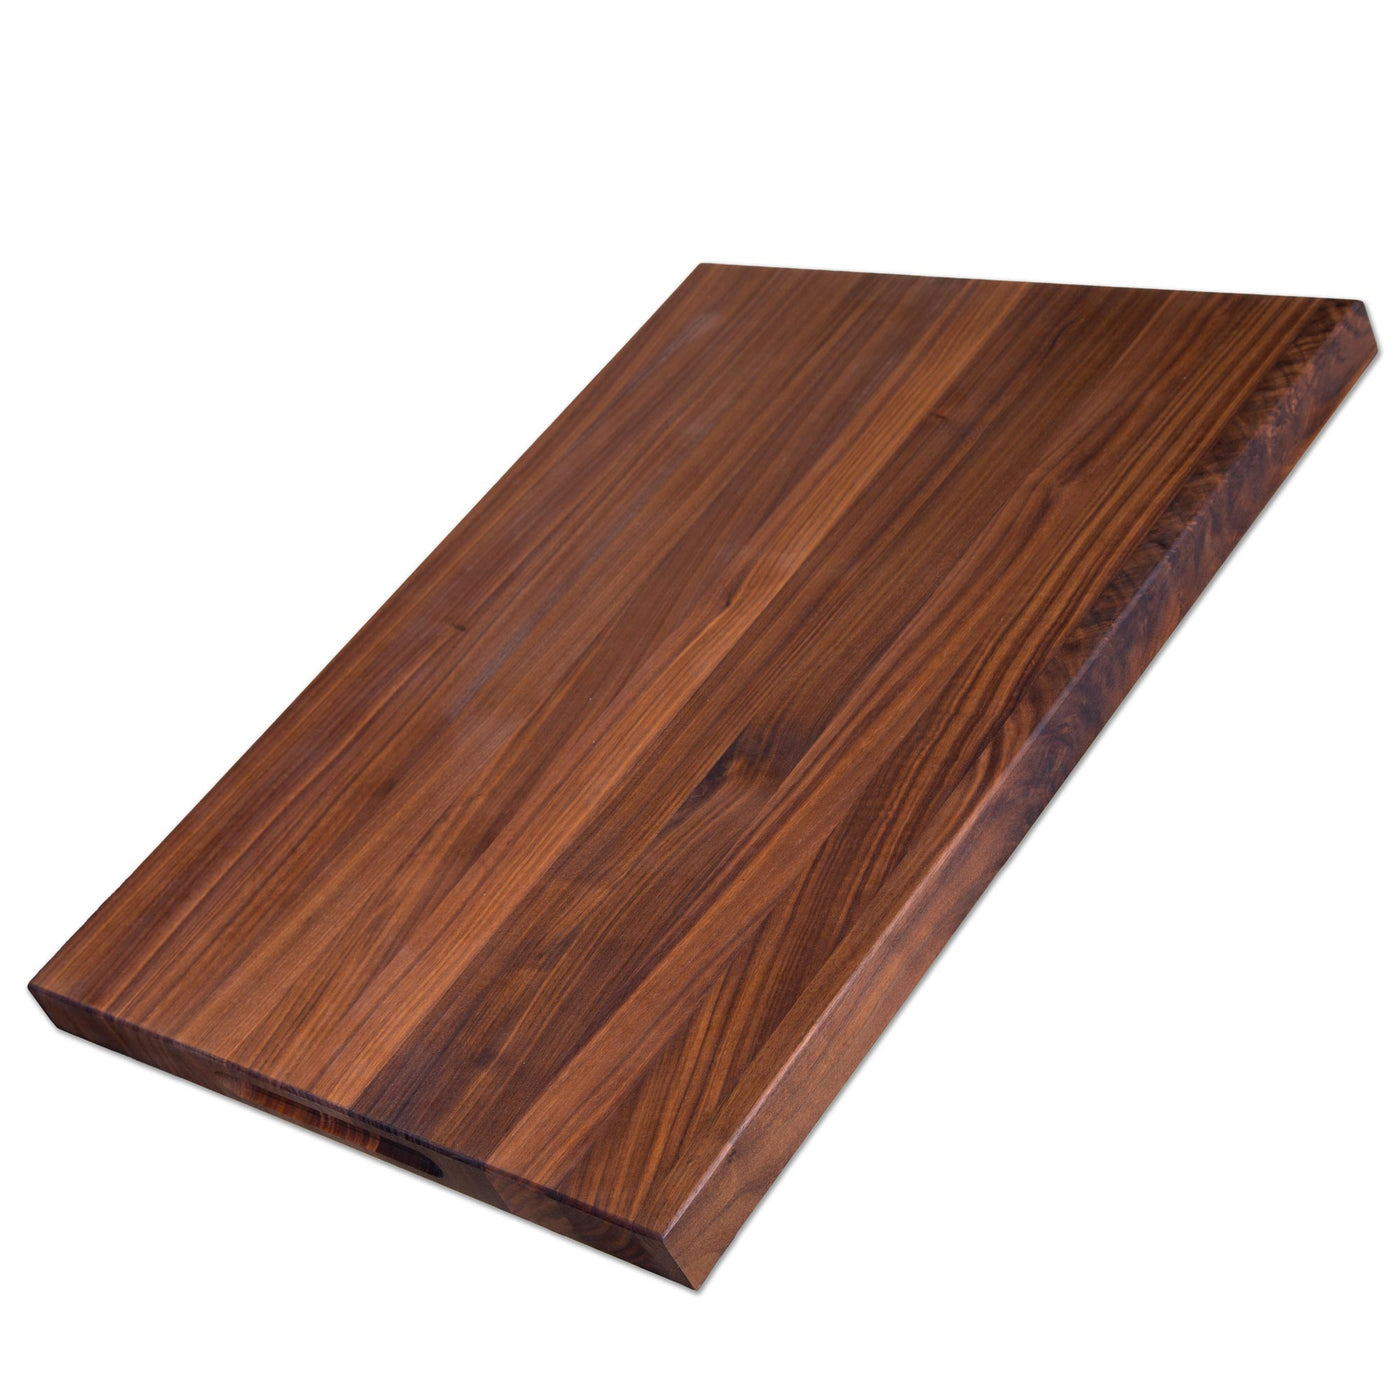 Walnut Edge Grain Butcher Block with Juice Groove and Integrated Handles (24 x 18 x 1.5 Inches)